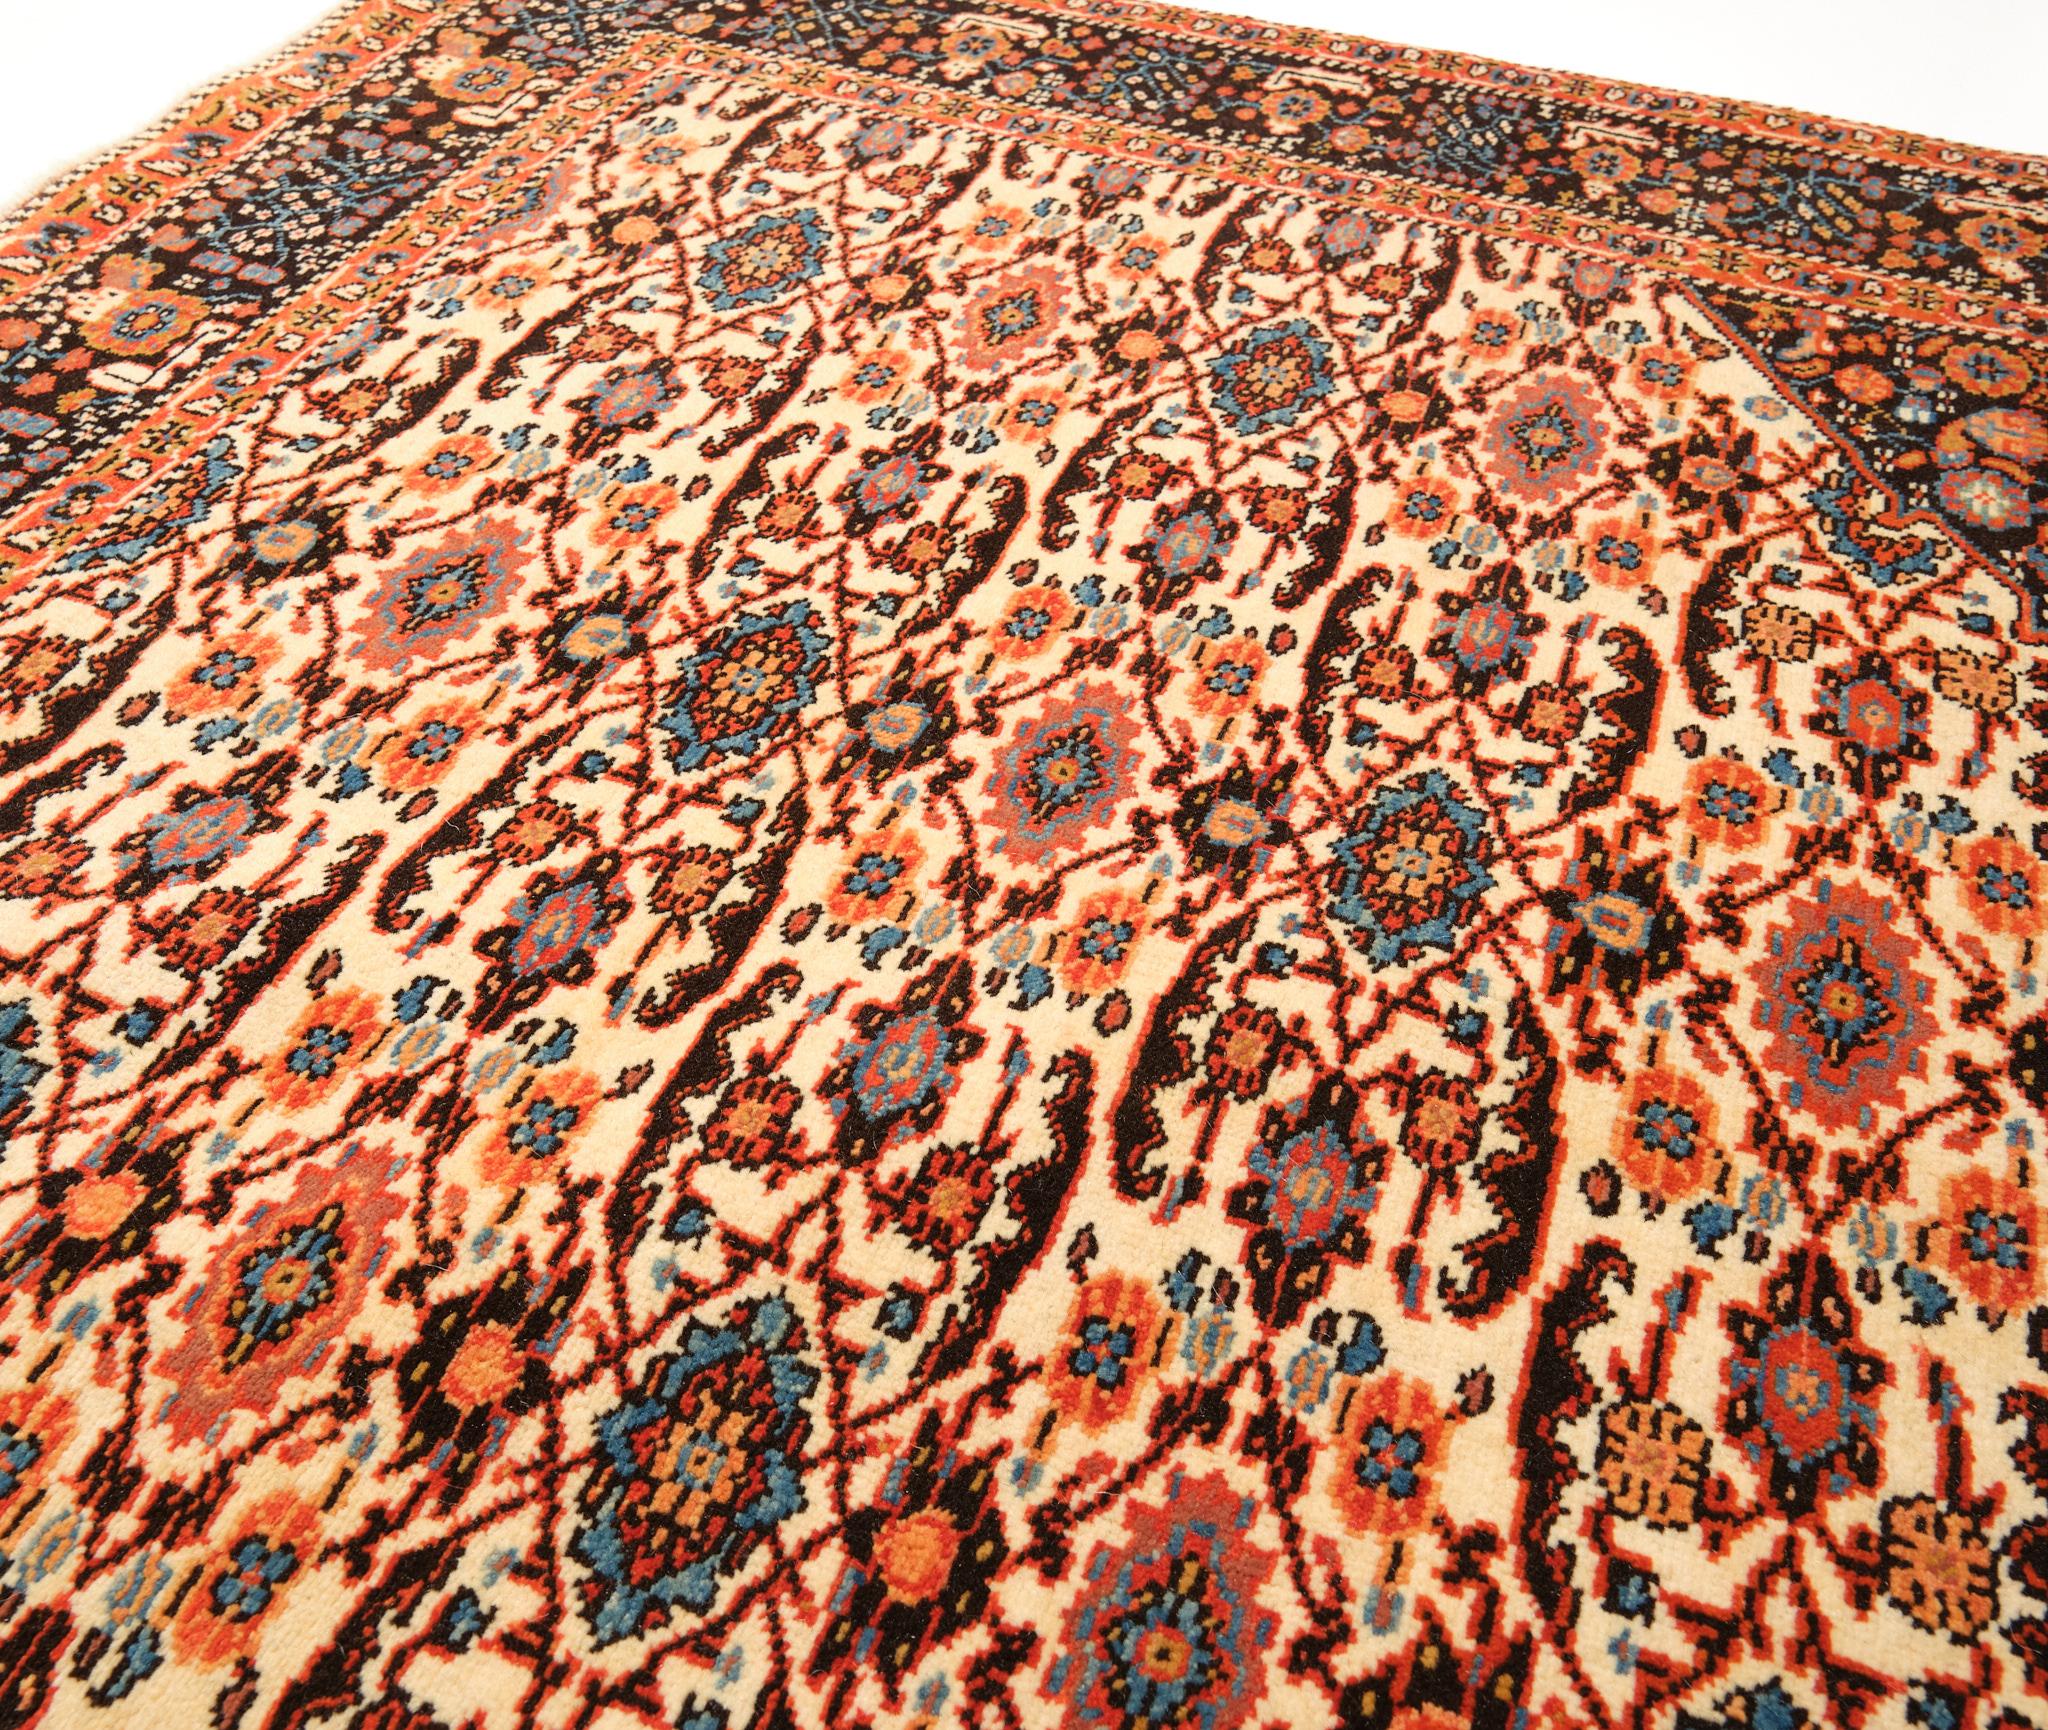 Vegetable Dyed Ararat Rugs Senna Wedding Rug Persian 19th Century Revival Carpet Natural Dyed For Sale